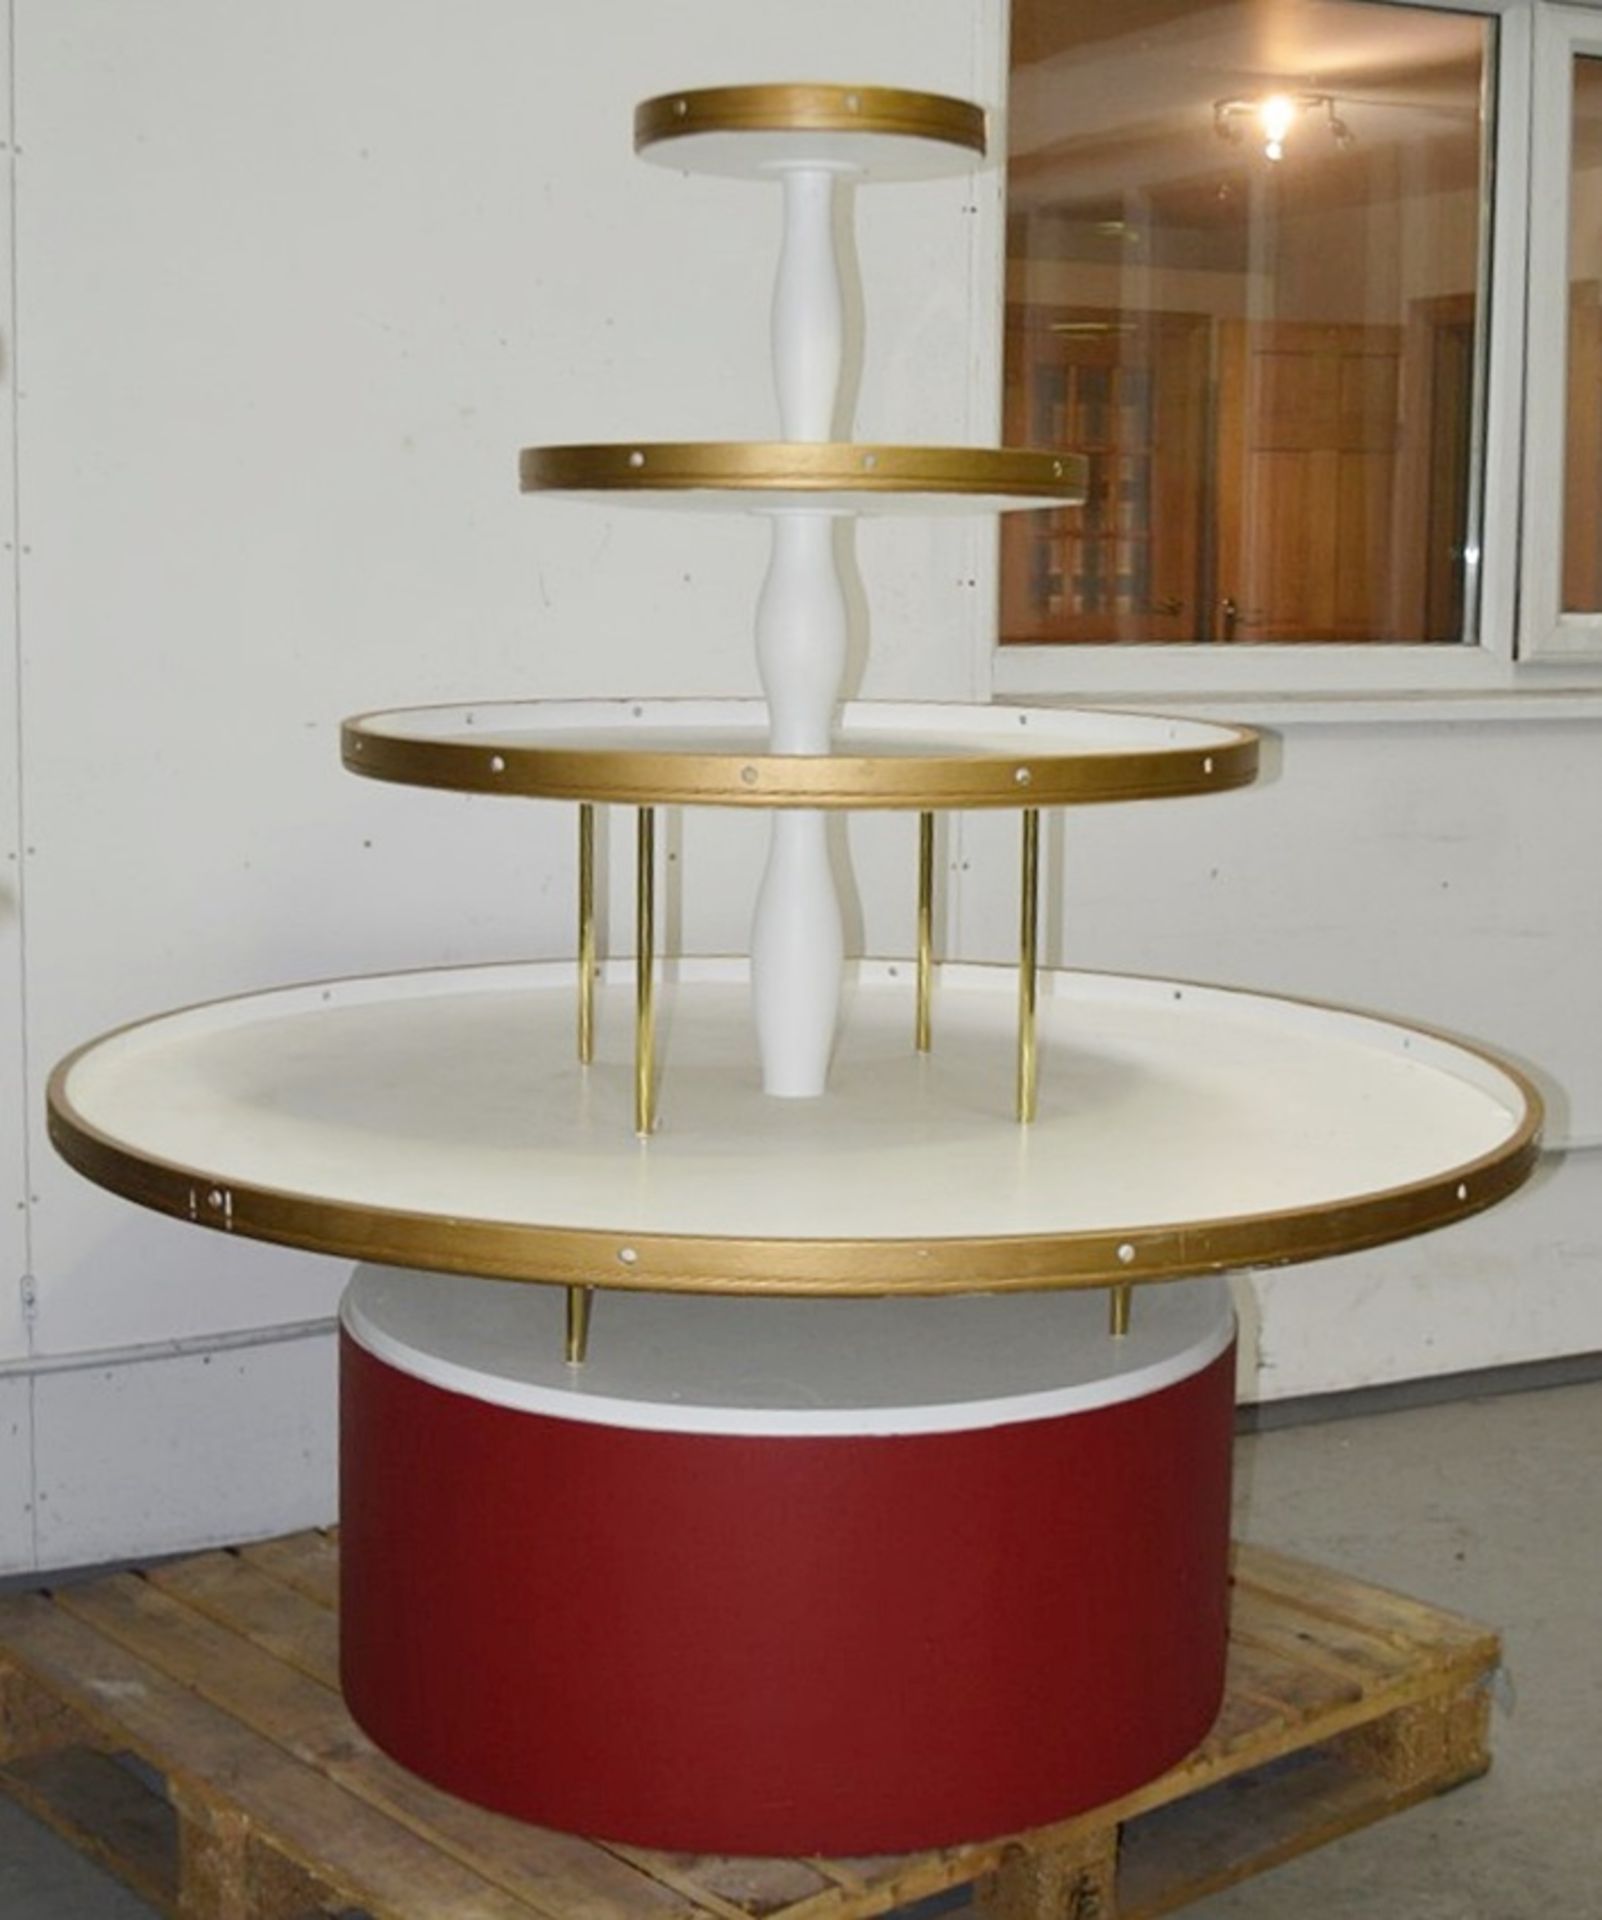 1 x Large 1.5 Metre High 4-Tier Display Cake / Merchandise Stand - Dimensions: Height 155cm /